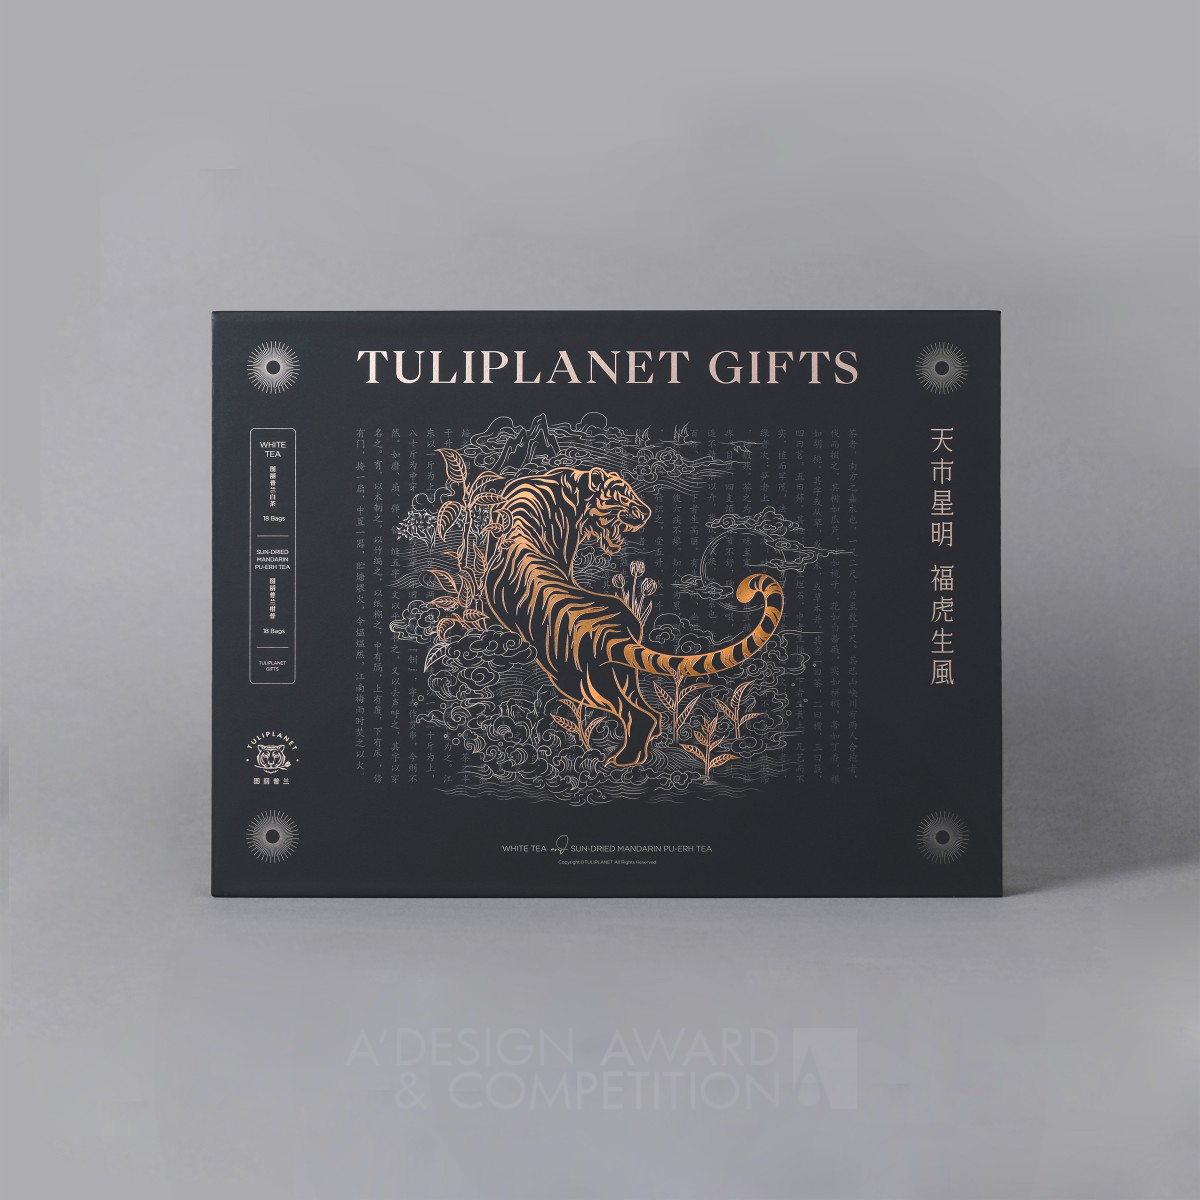 Tuliplanet Gifts